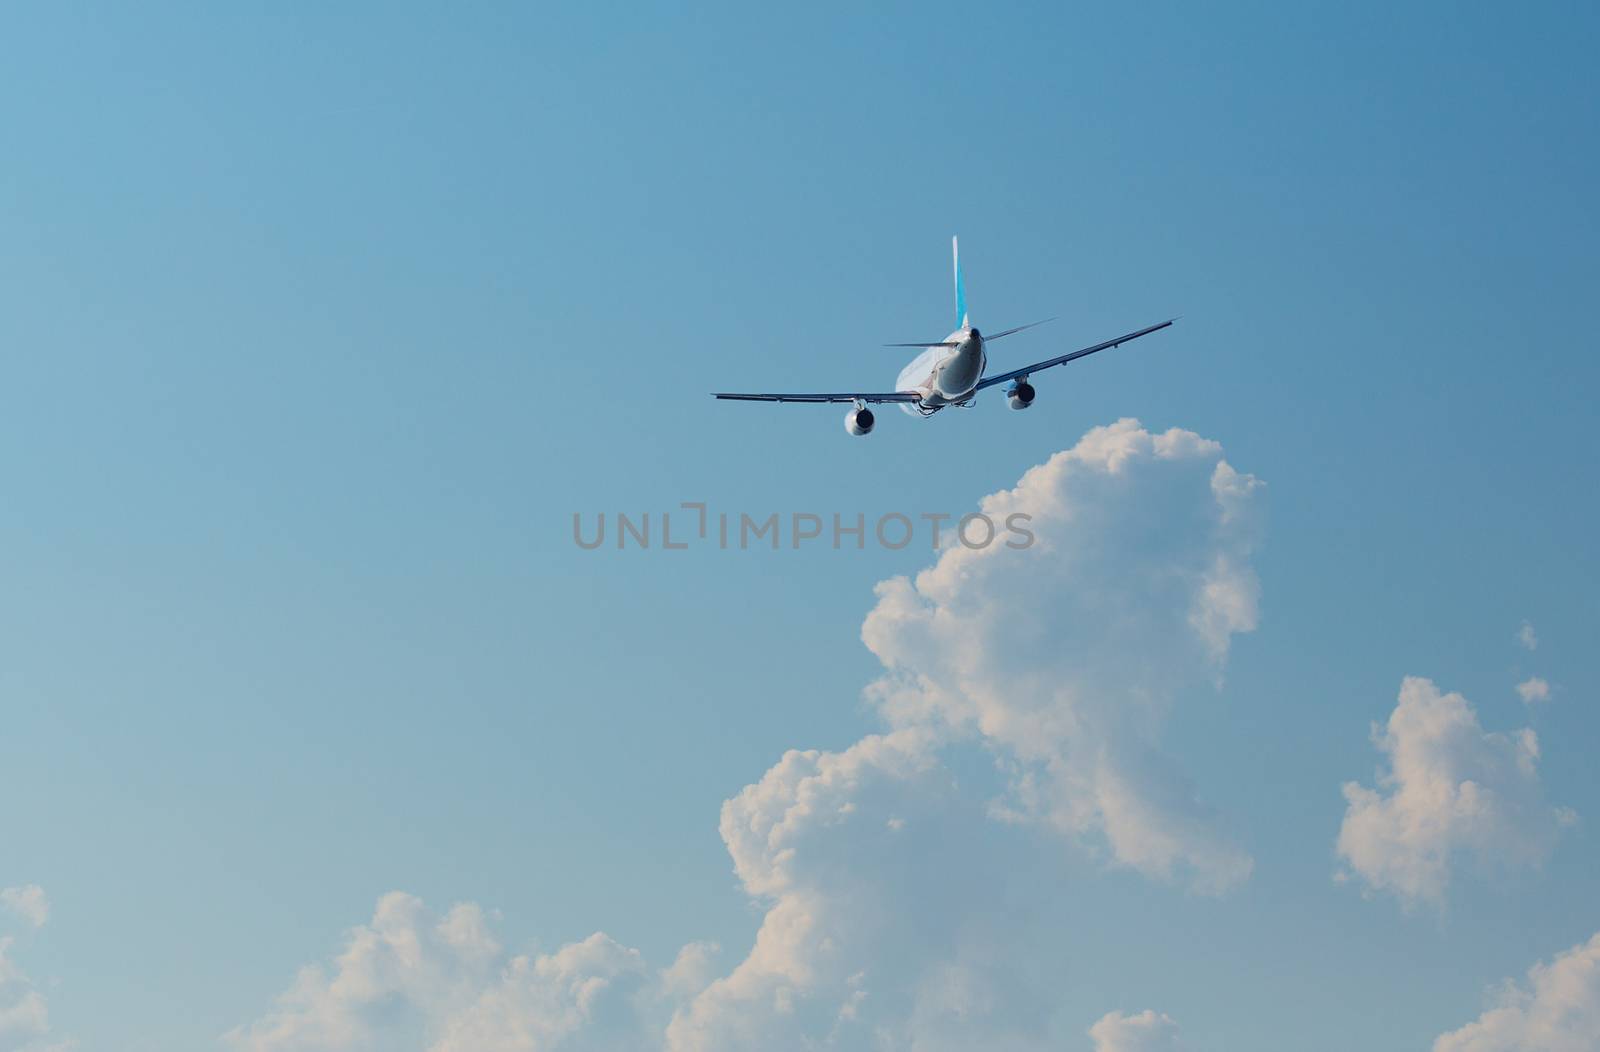 Airplane in the sky by vlad_star